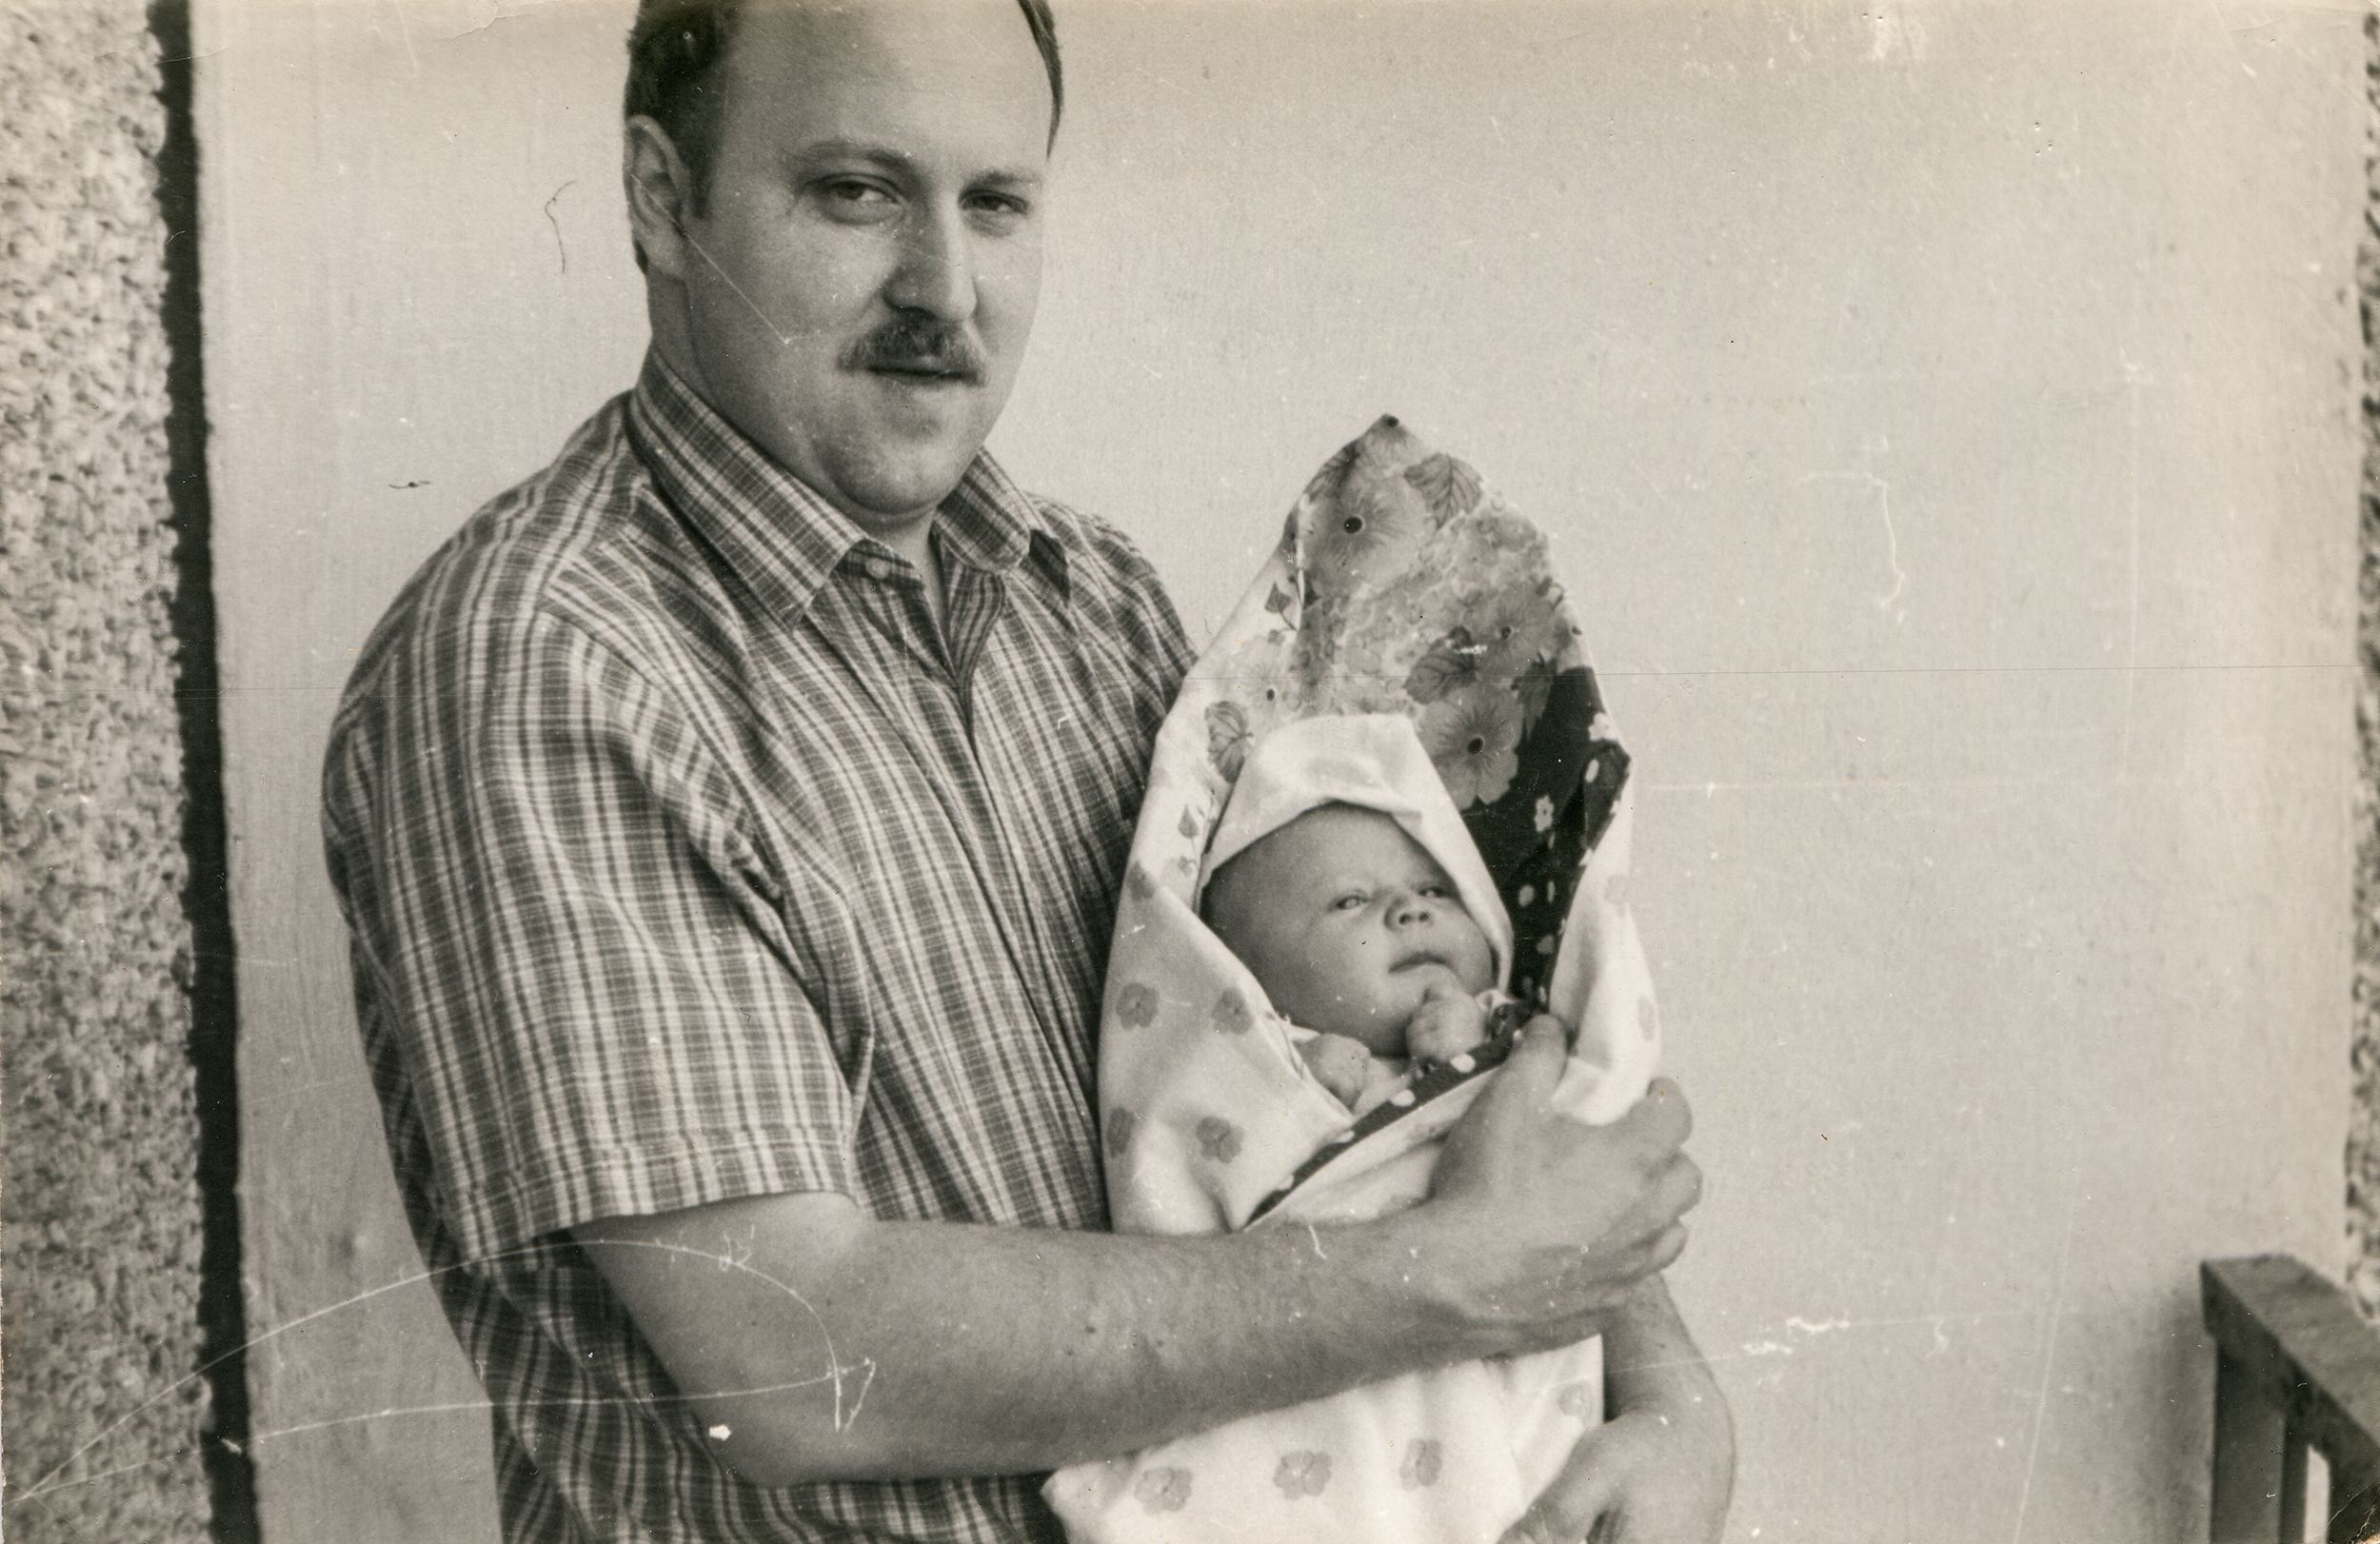 Old photograph of a man holding a baby. | Source: Shutterstock